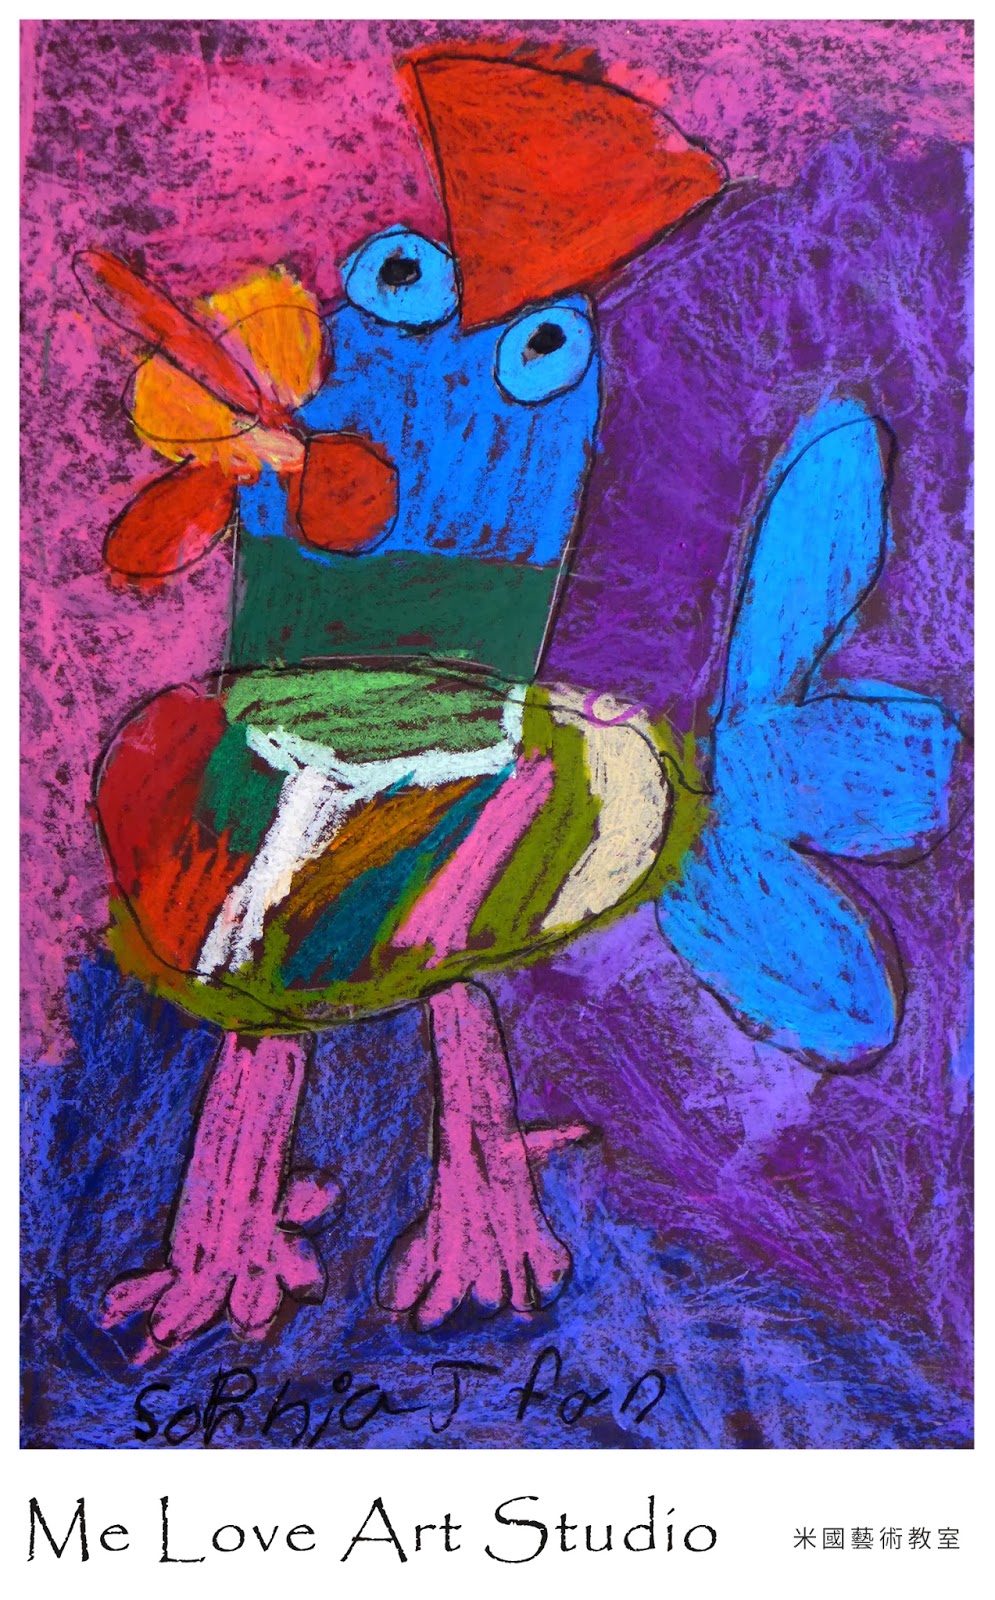 Me Love Art Studio《米國藝術》: A Rooster (Pre-K) - Learn from Pablo Picasso